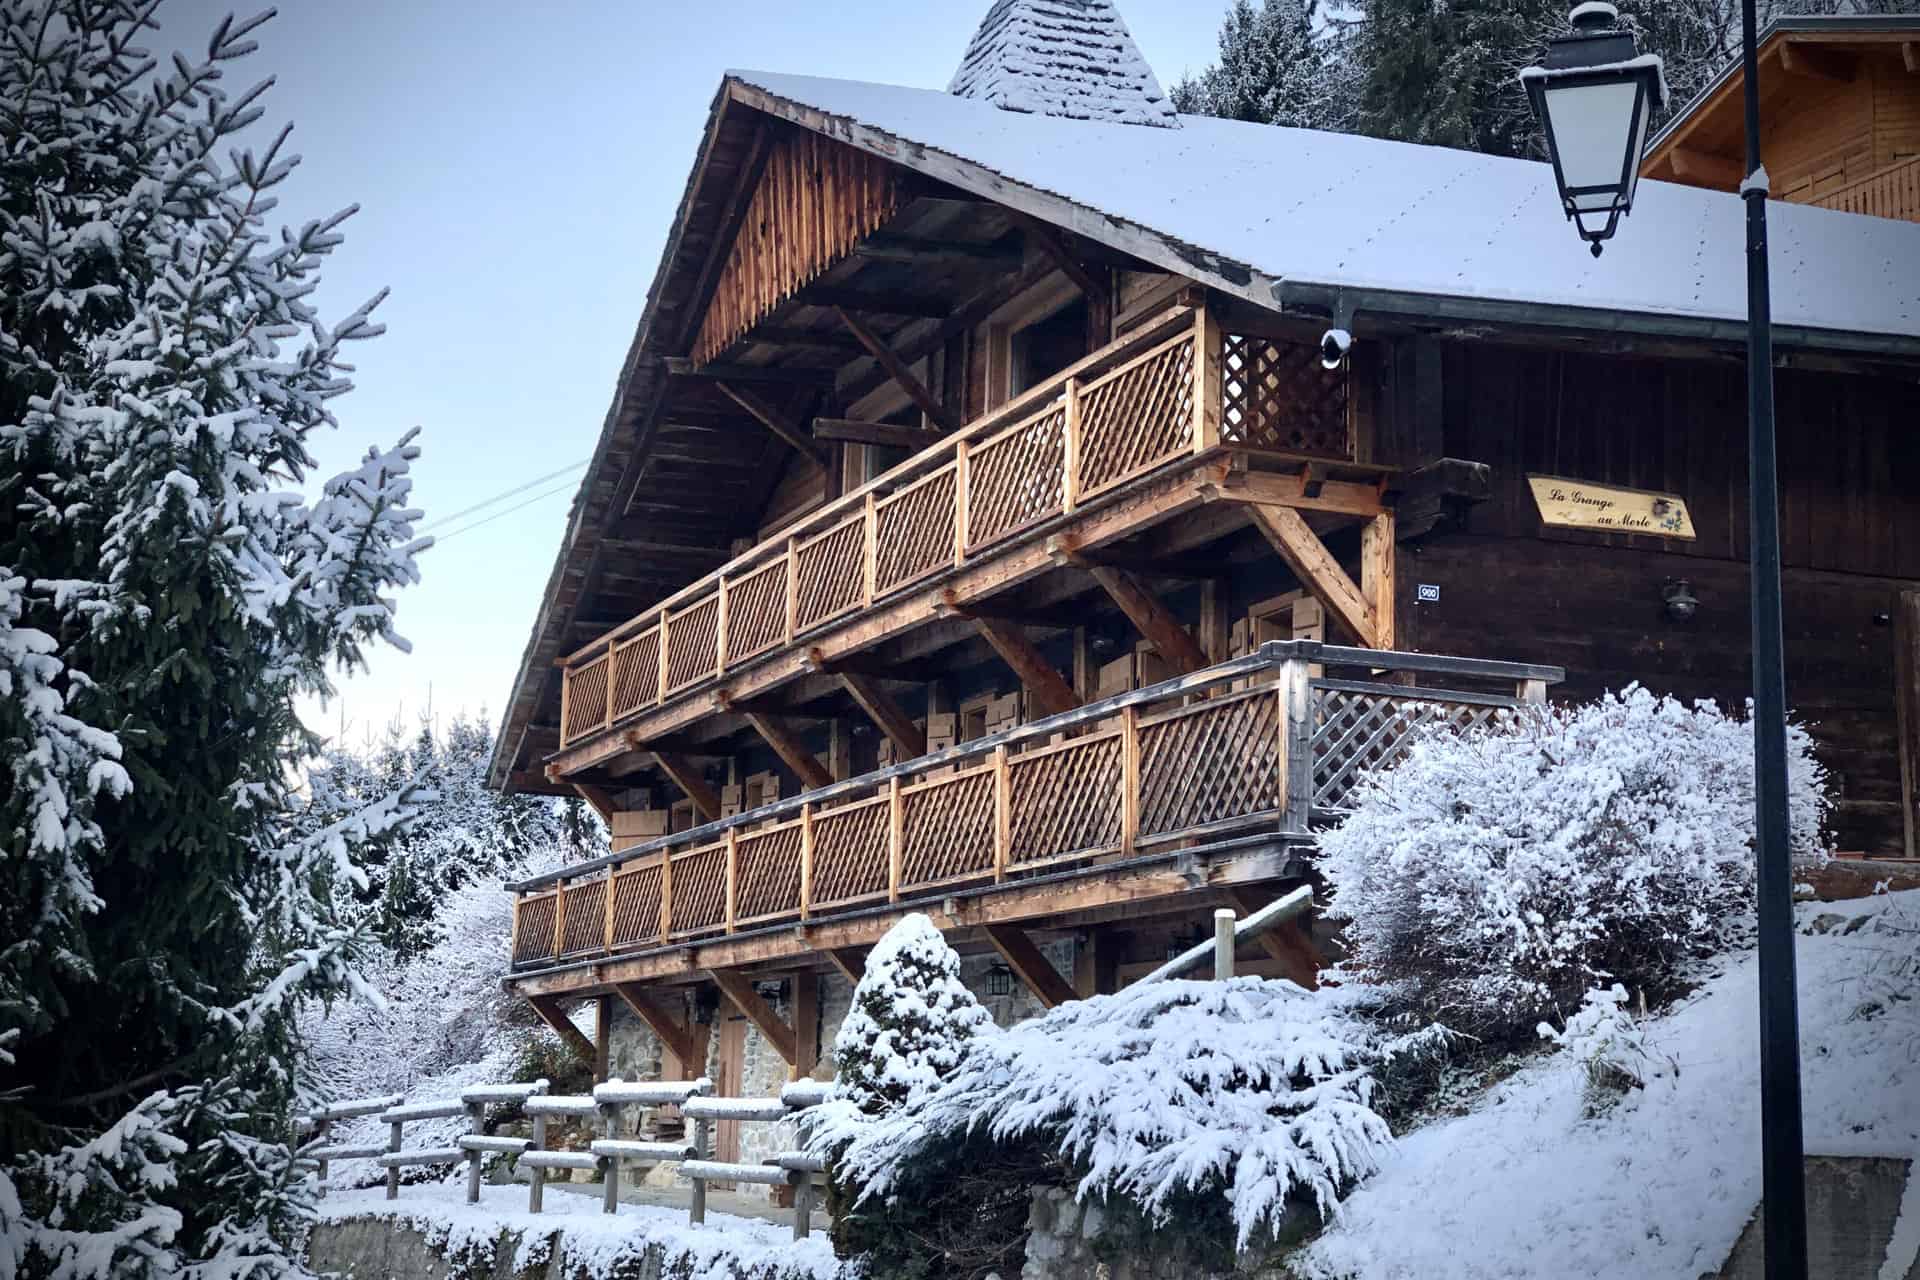 front view of the chalet from the road in the snow